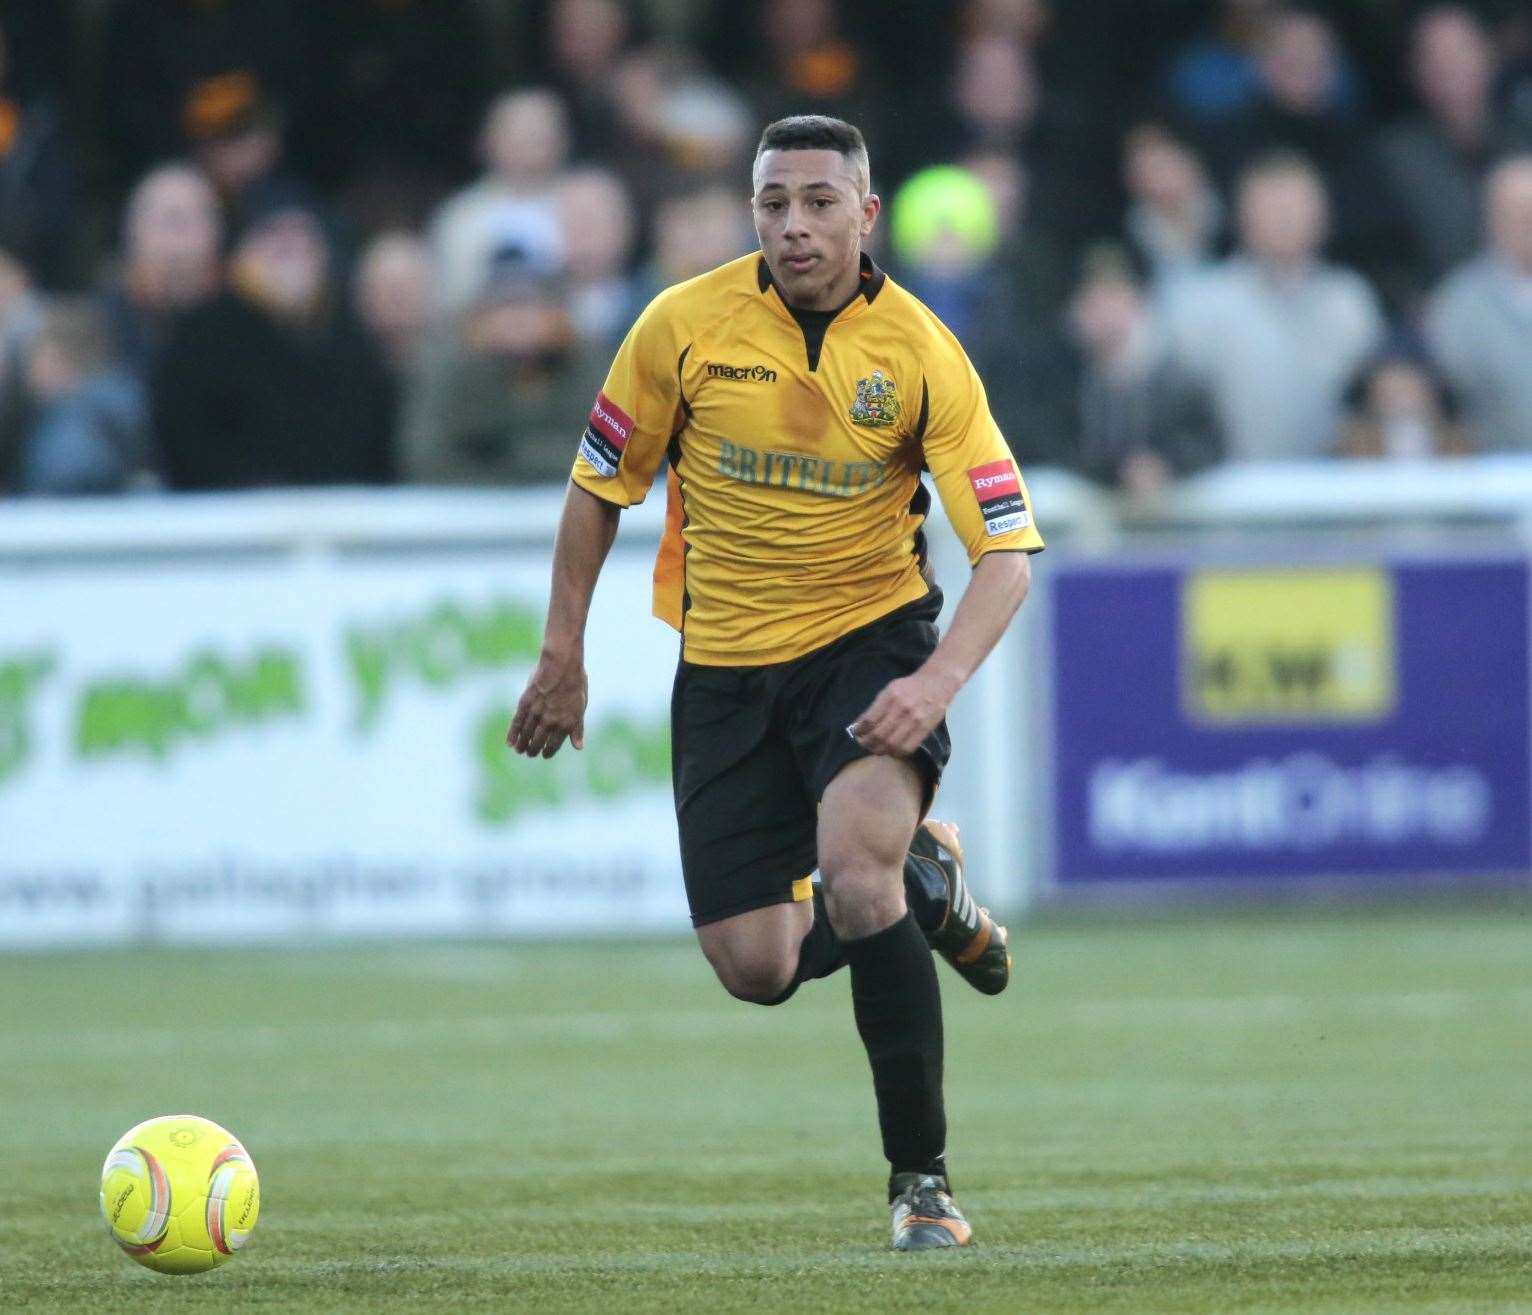 Mr Simpson started his career at Maidstone United. He is pictured played for the Stones against Bognor Regis in December 2014 at the Gallagher Stadium. Picture: Martin Apps